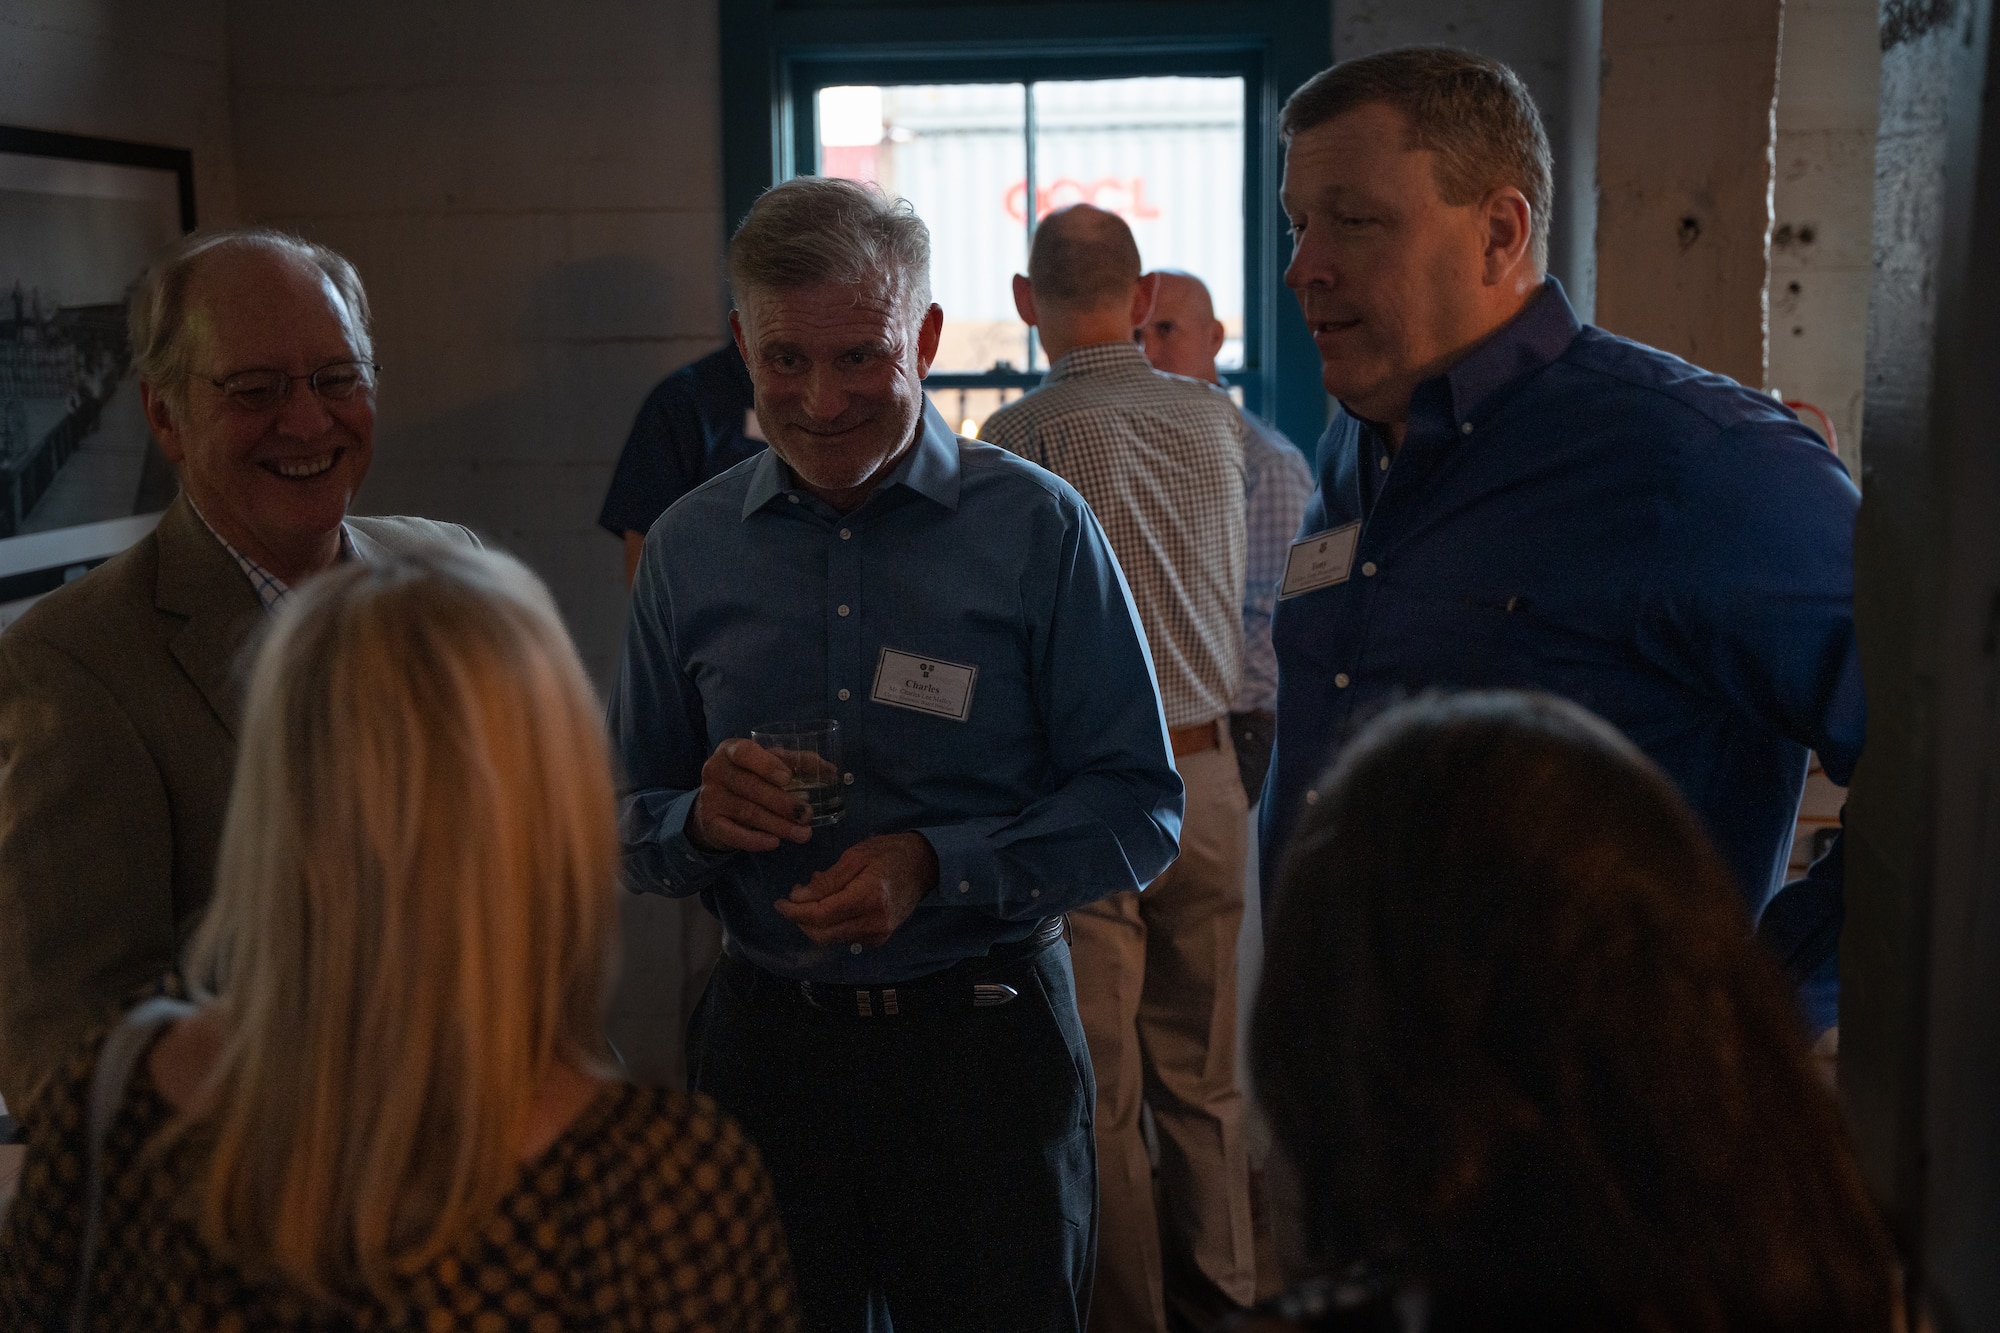 Charles Lee Malloy, Clovis economic Board President, and Air Force Special Operations Command commander Lt. Gen. Tony Bauernfeind talk with guests during an off-base civic leader engagement